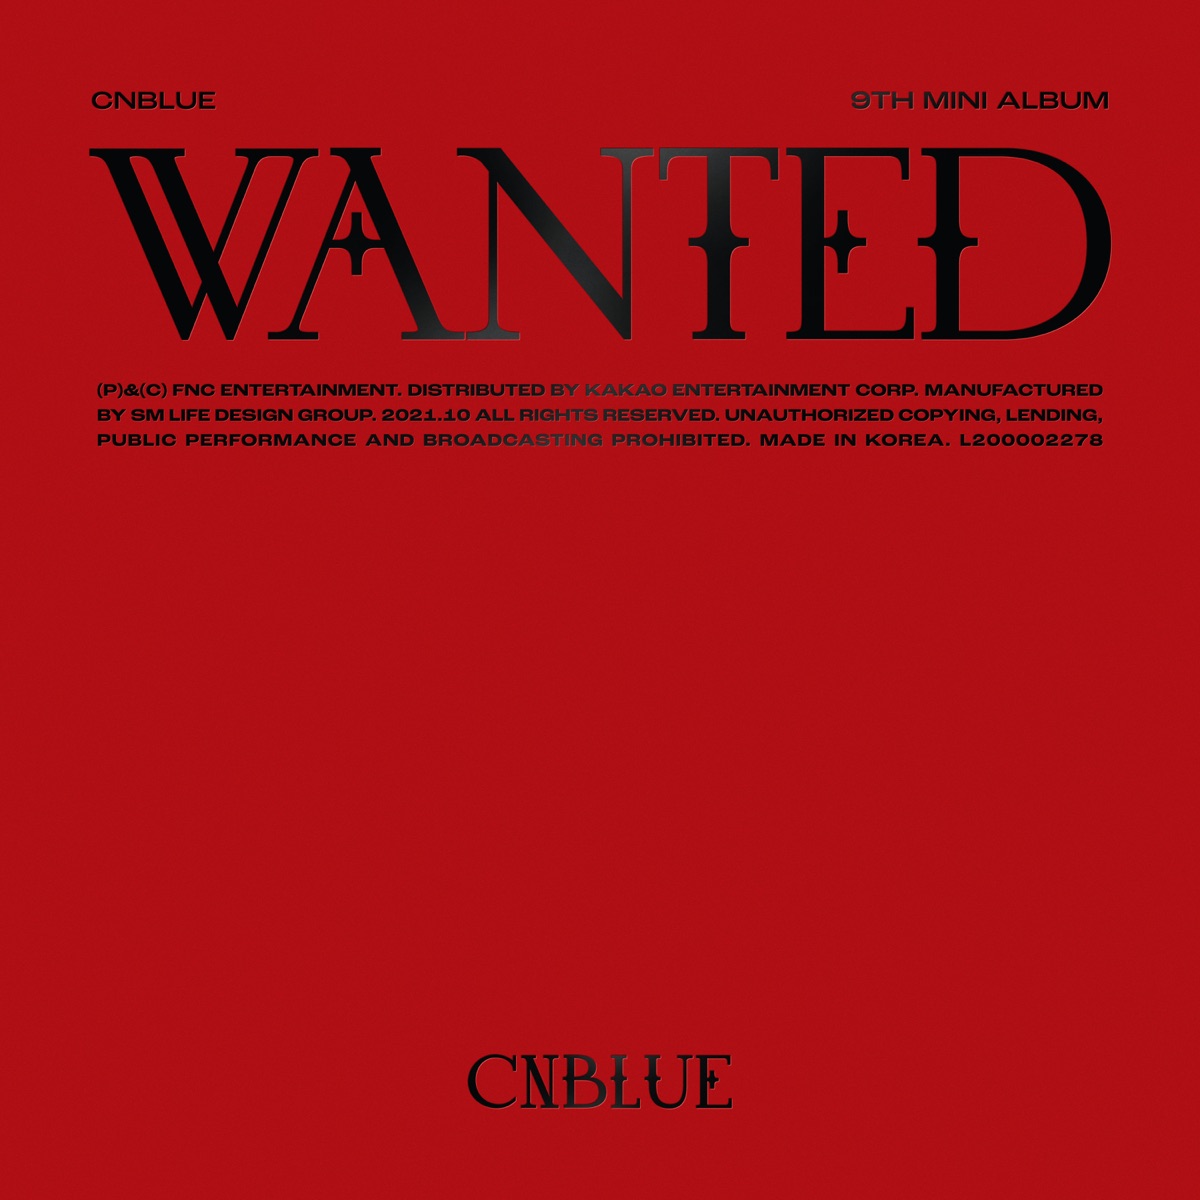 Cover for『CNBLUE - 99%』from the release『WANTED』